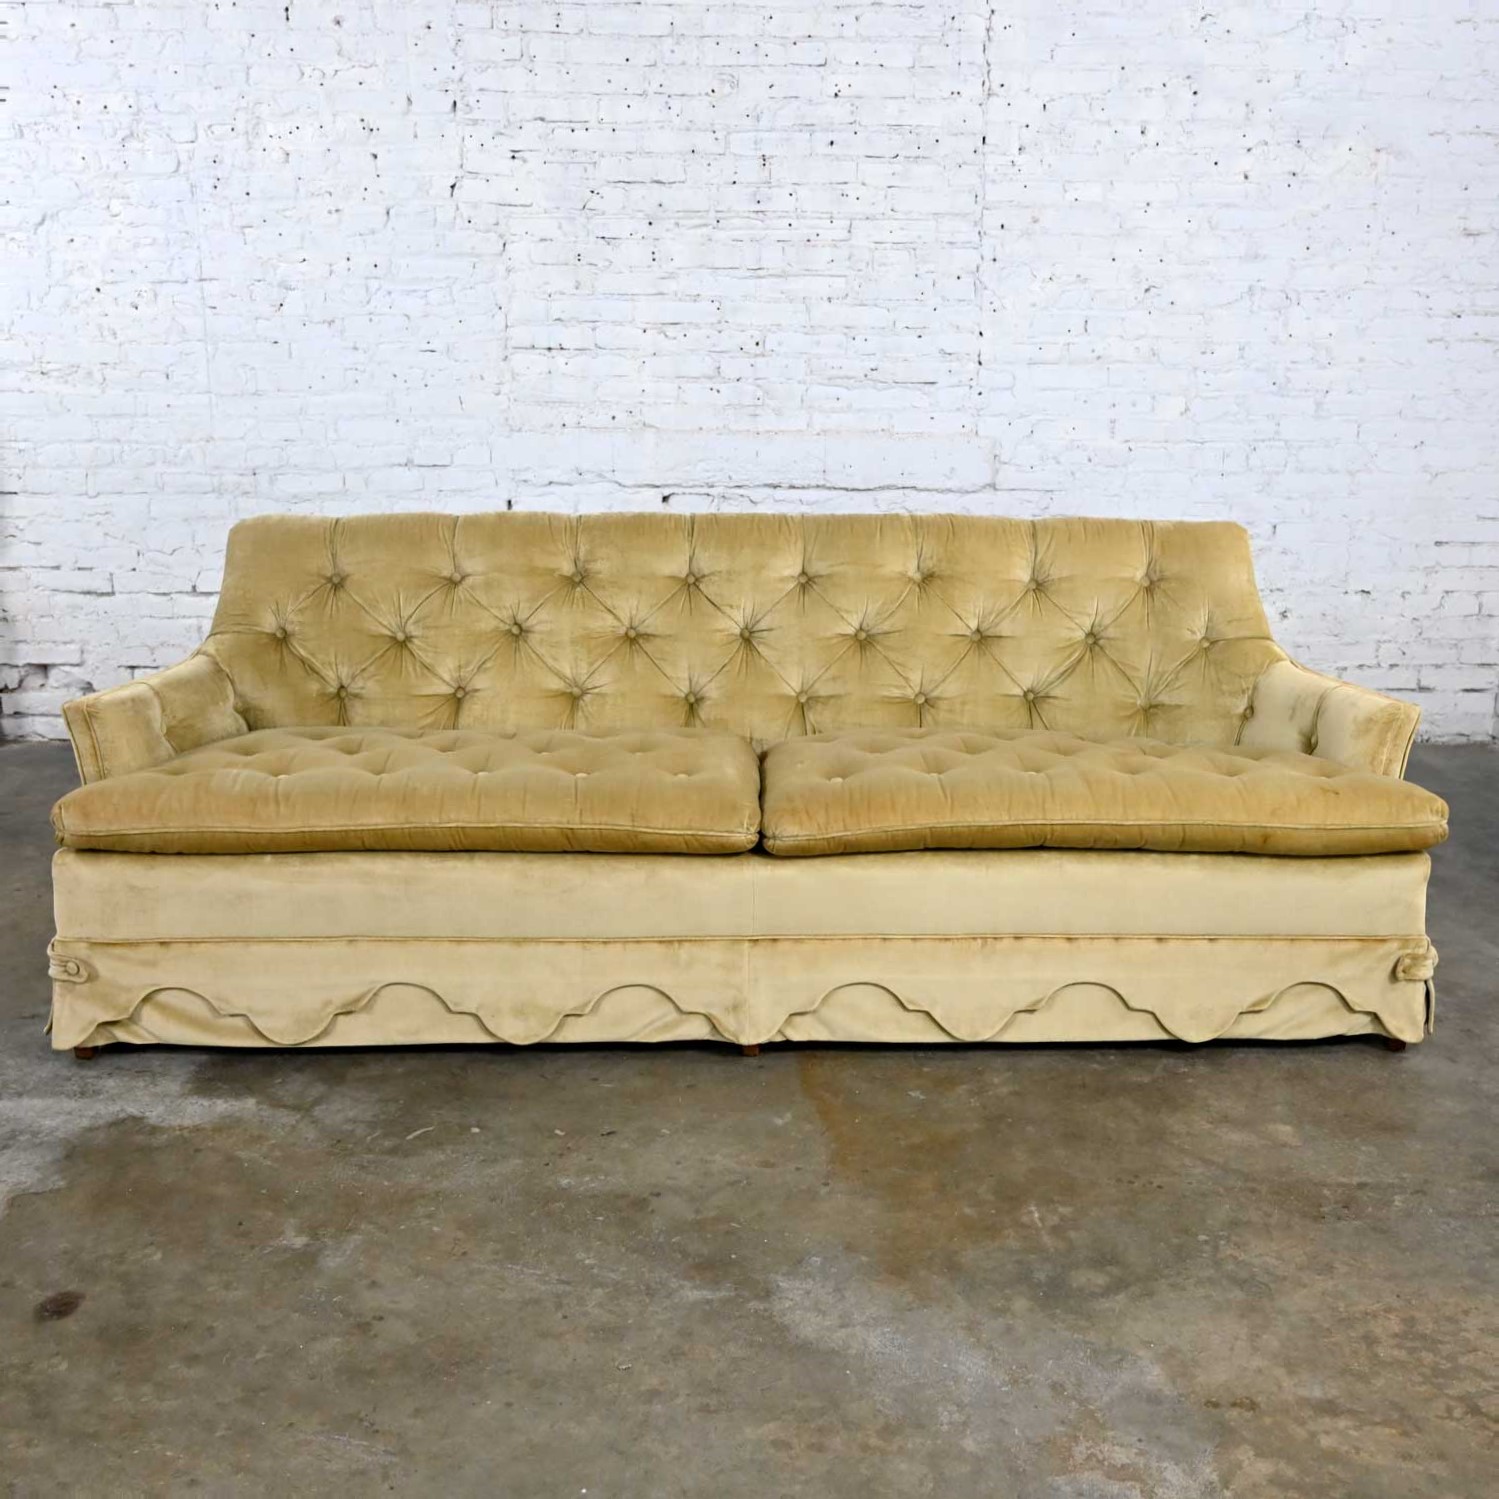 Vintage Hollywood Regency Tawny Colored Button Tufted Velvet Sofa by Heritage